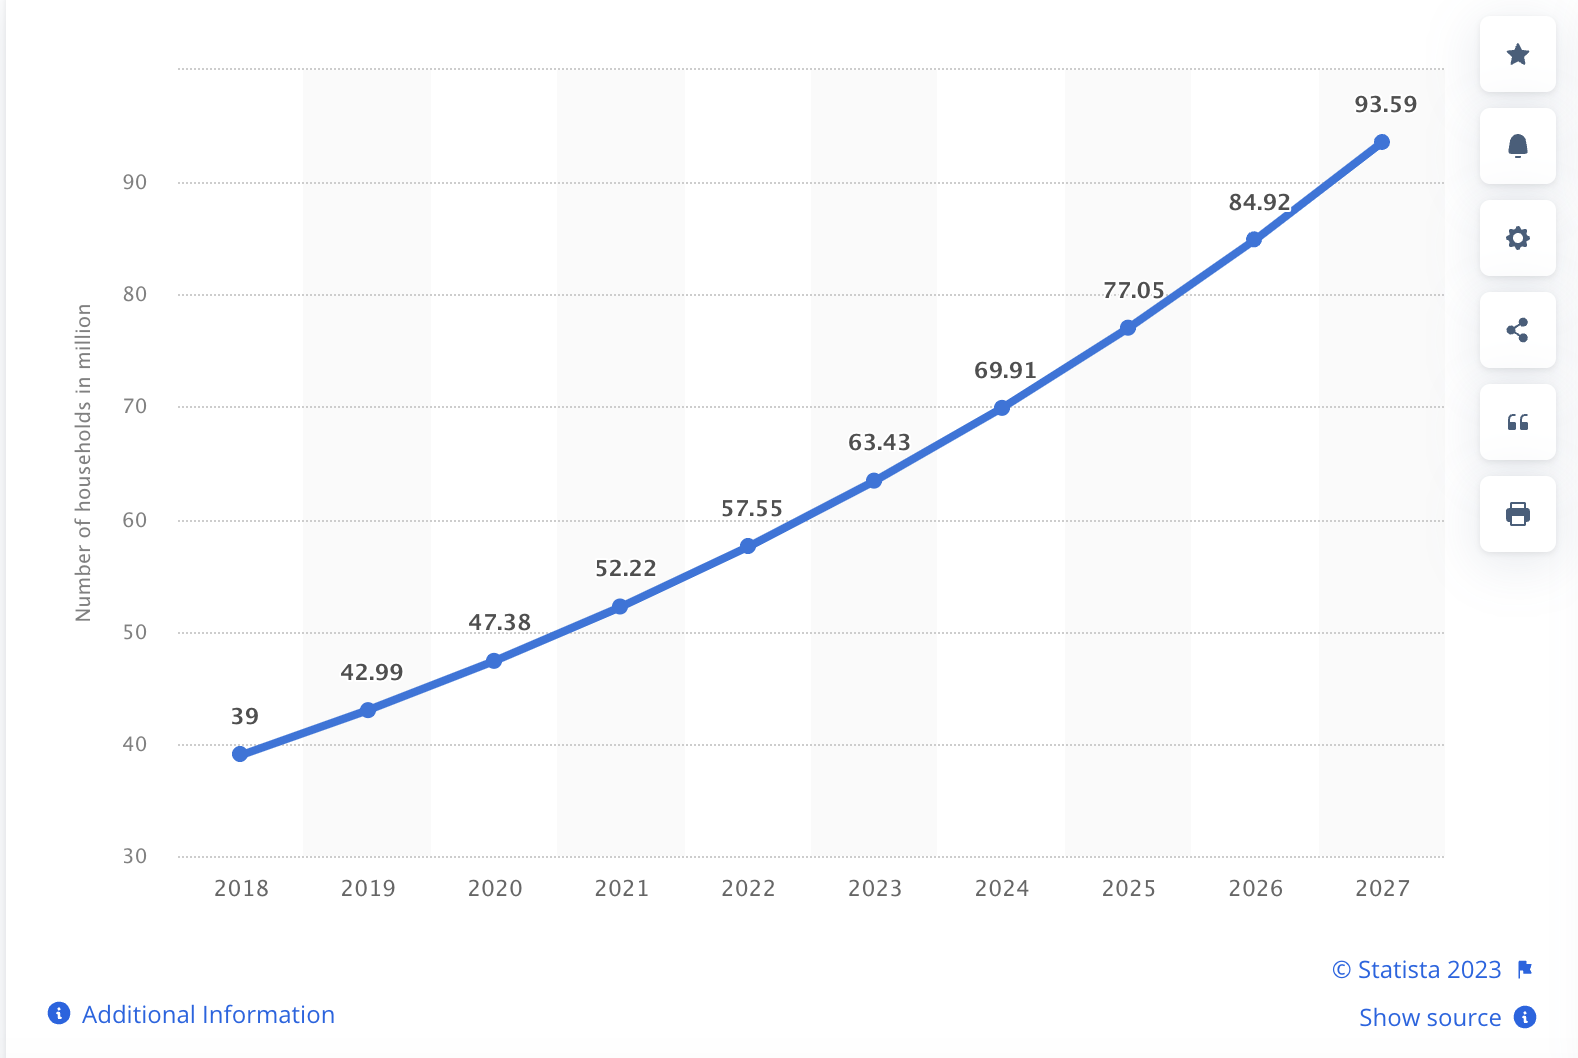 Number of users of smart homes in the United States 2018-2027